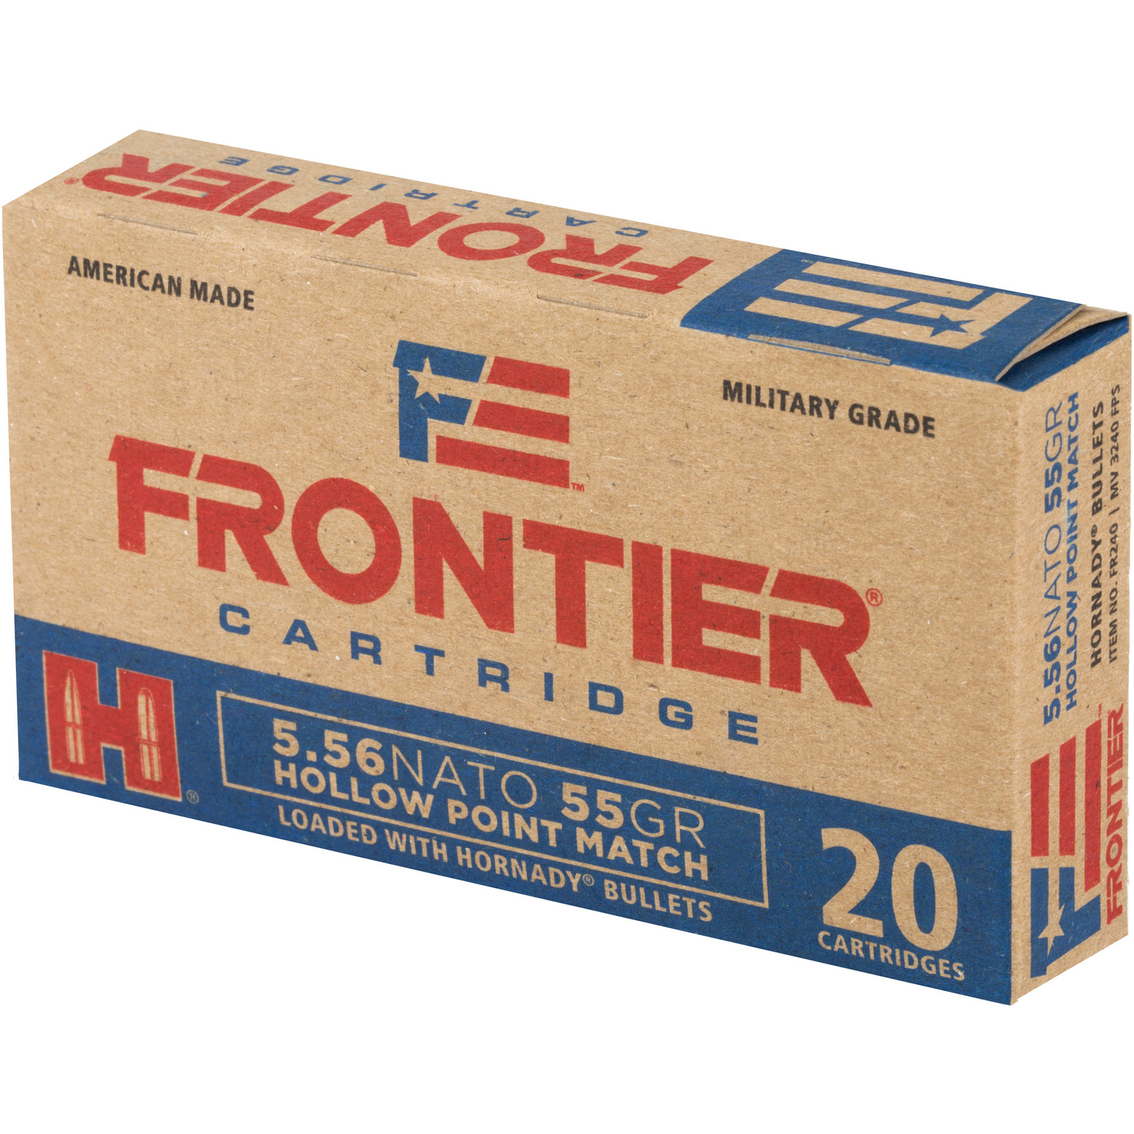 Frontier 5.56 NATO 55 Gr. HP Match, 20 Rnd - Image 3 of 4